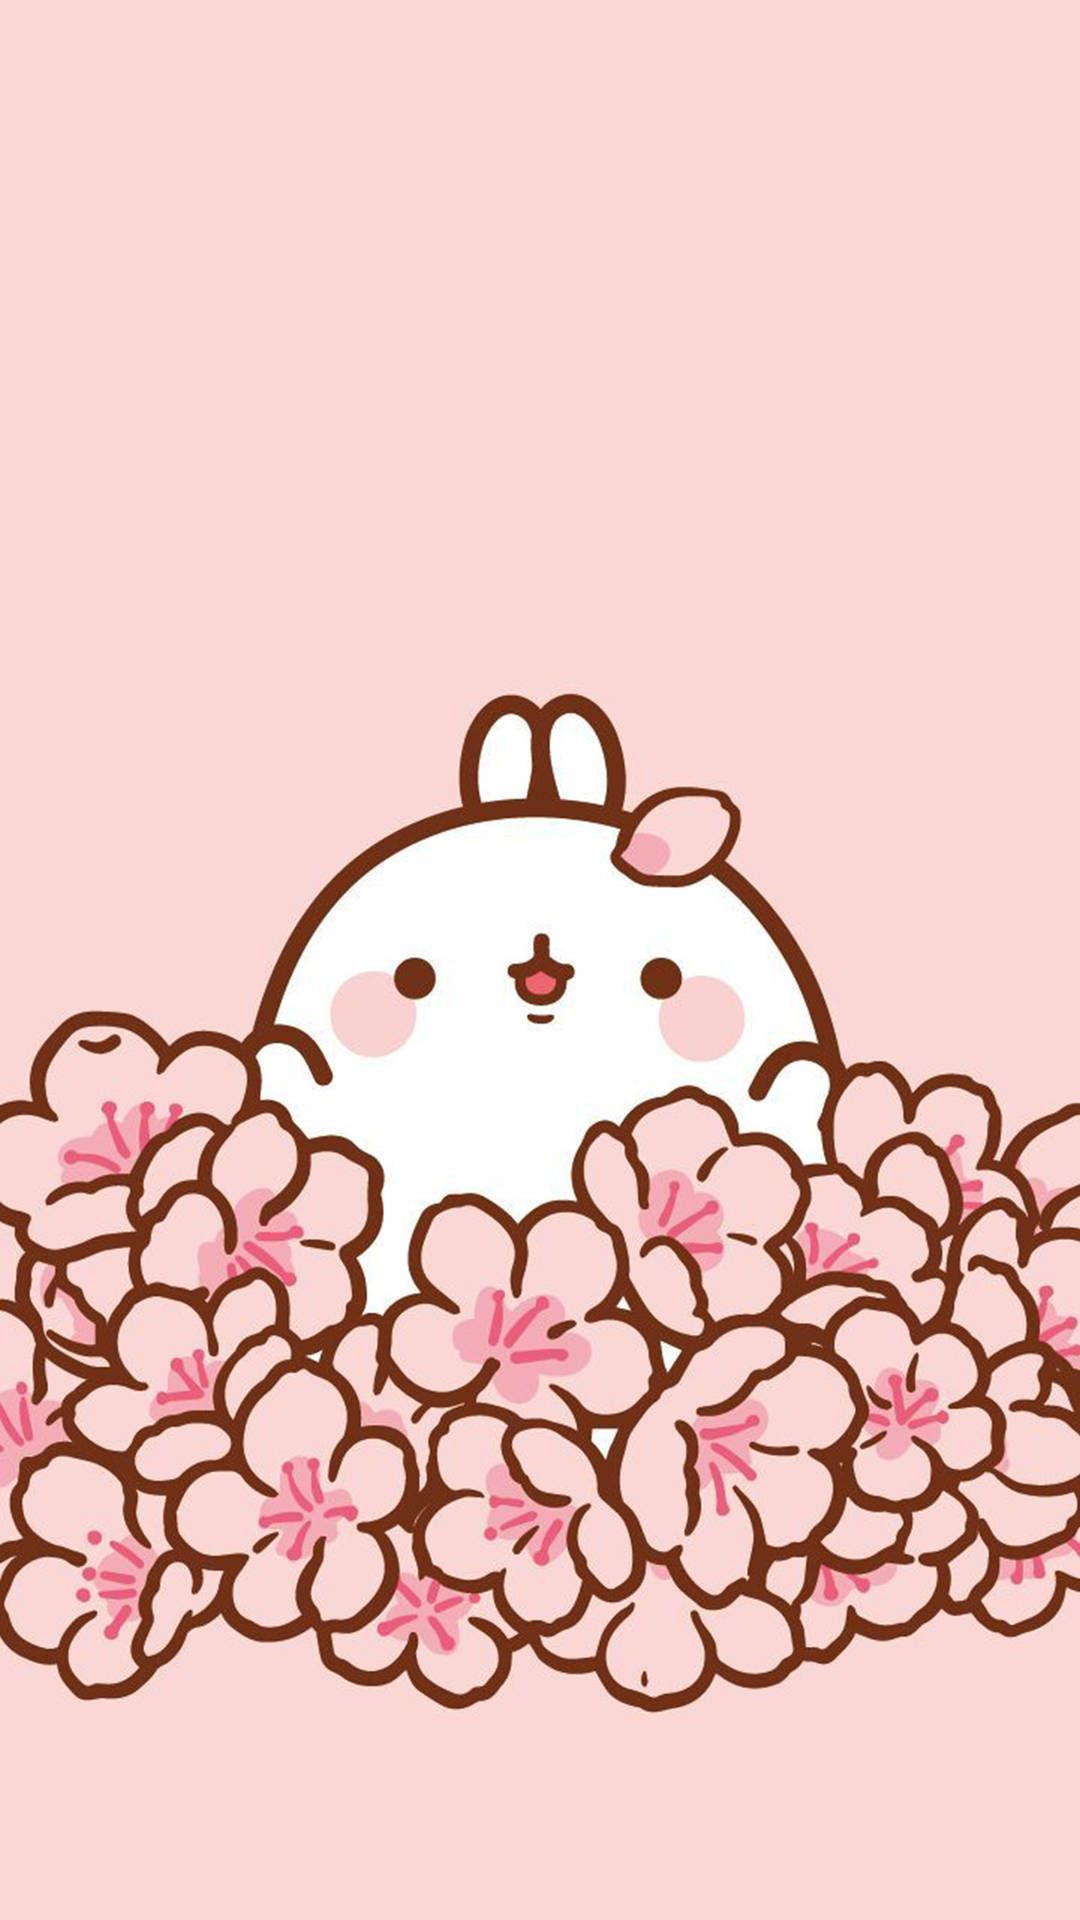 A cute cartoon bunny in the middle of pink flowers - Molang